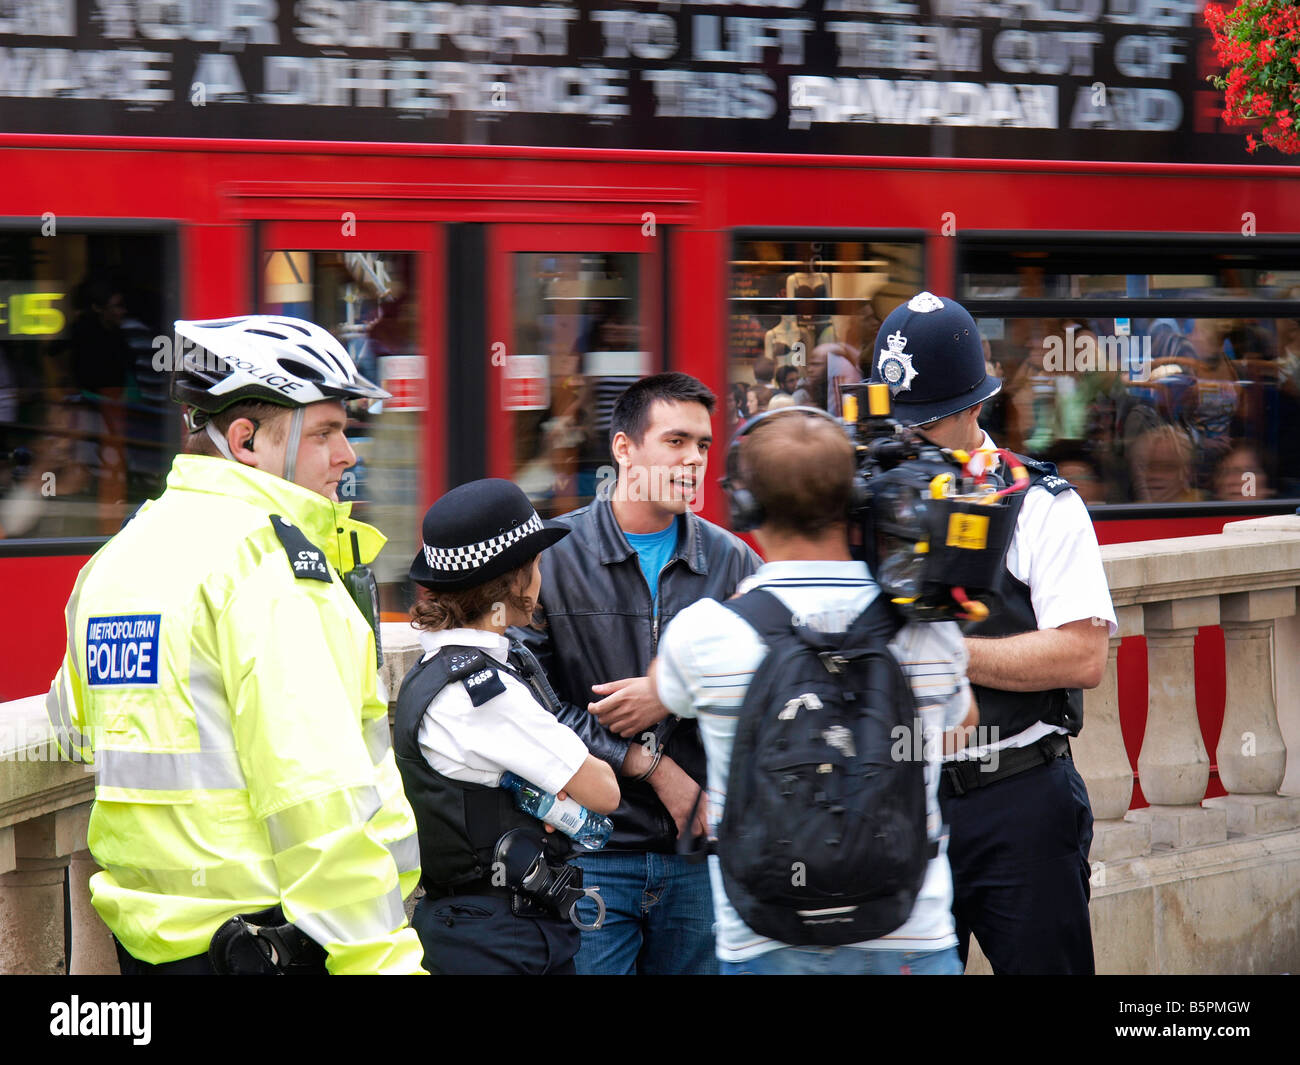 Police officers with apprehended suspect and news cameraman on Oxford Circus London UK Stock Photo